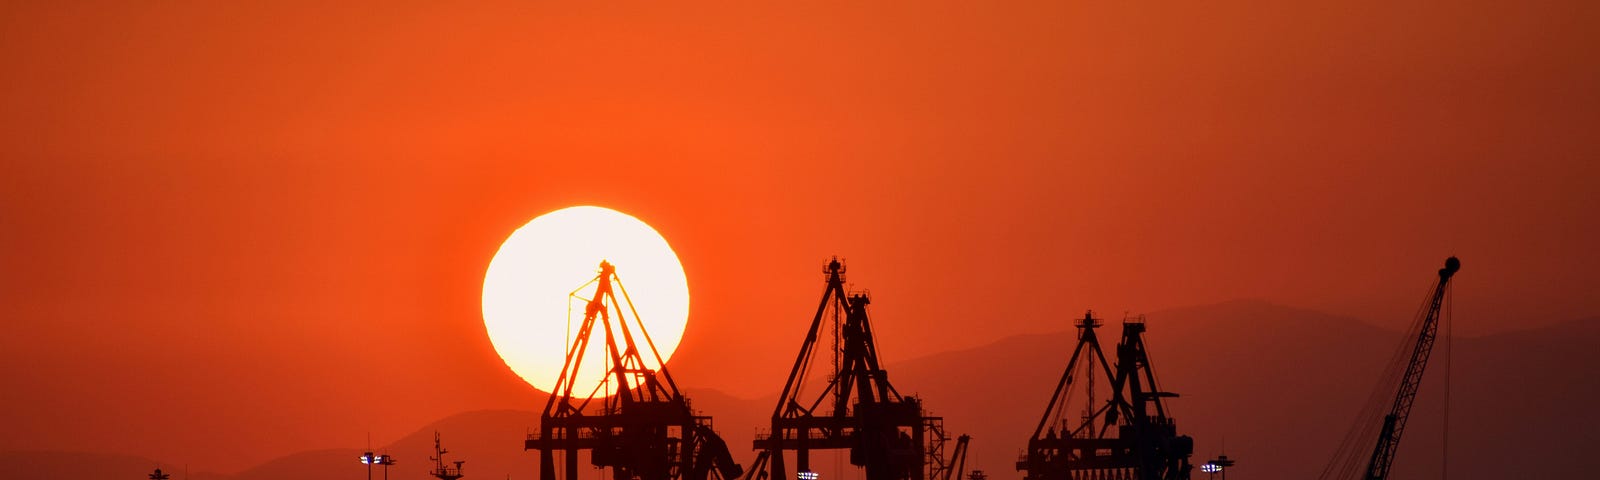 View from the sea of a port with various cranes in silhouette overlooking its harbour. The sun has begun to set behind the hills in the far distance, making the whole sky a vivid orange.